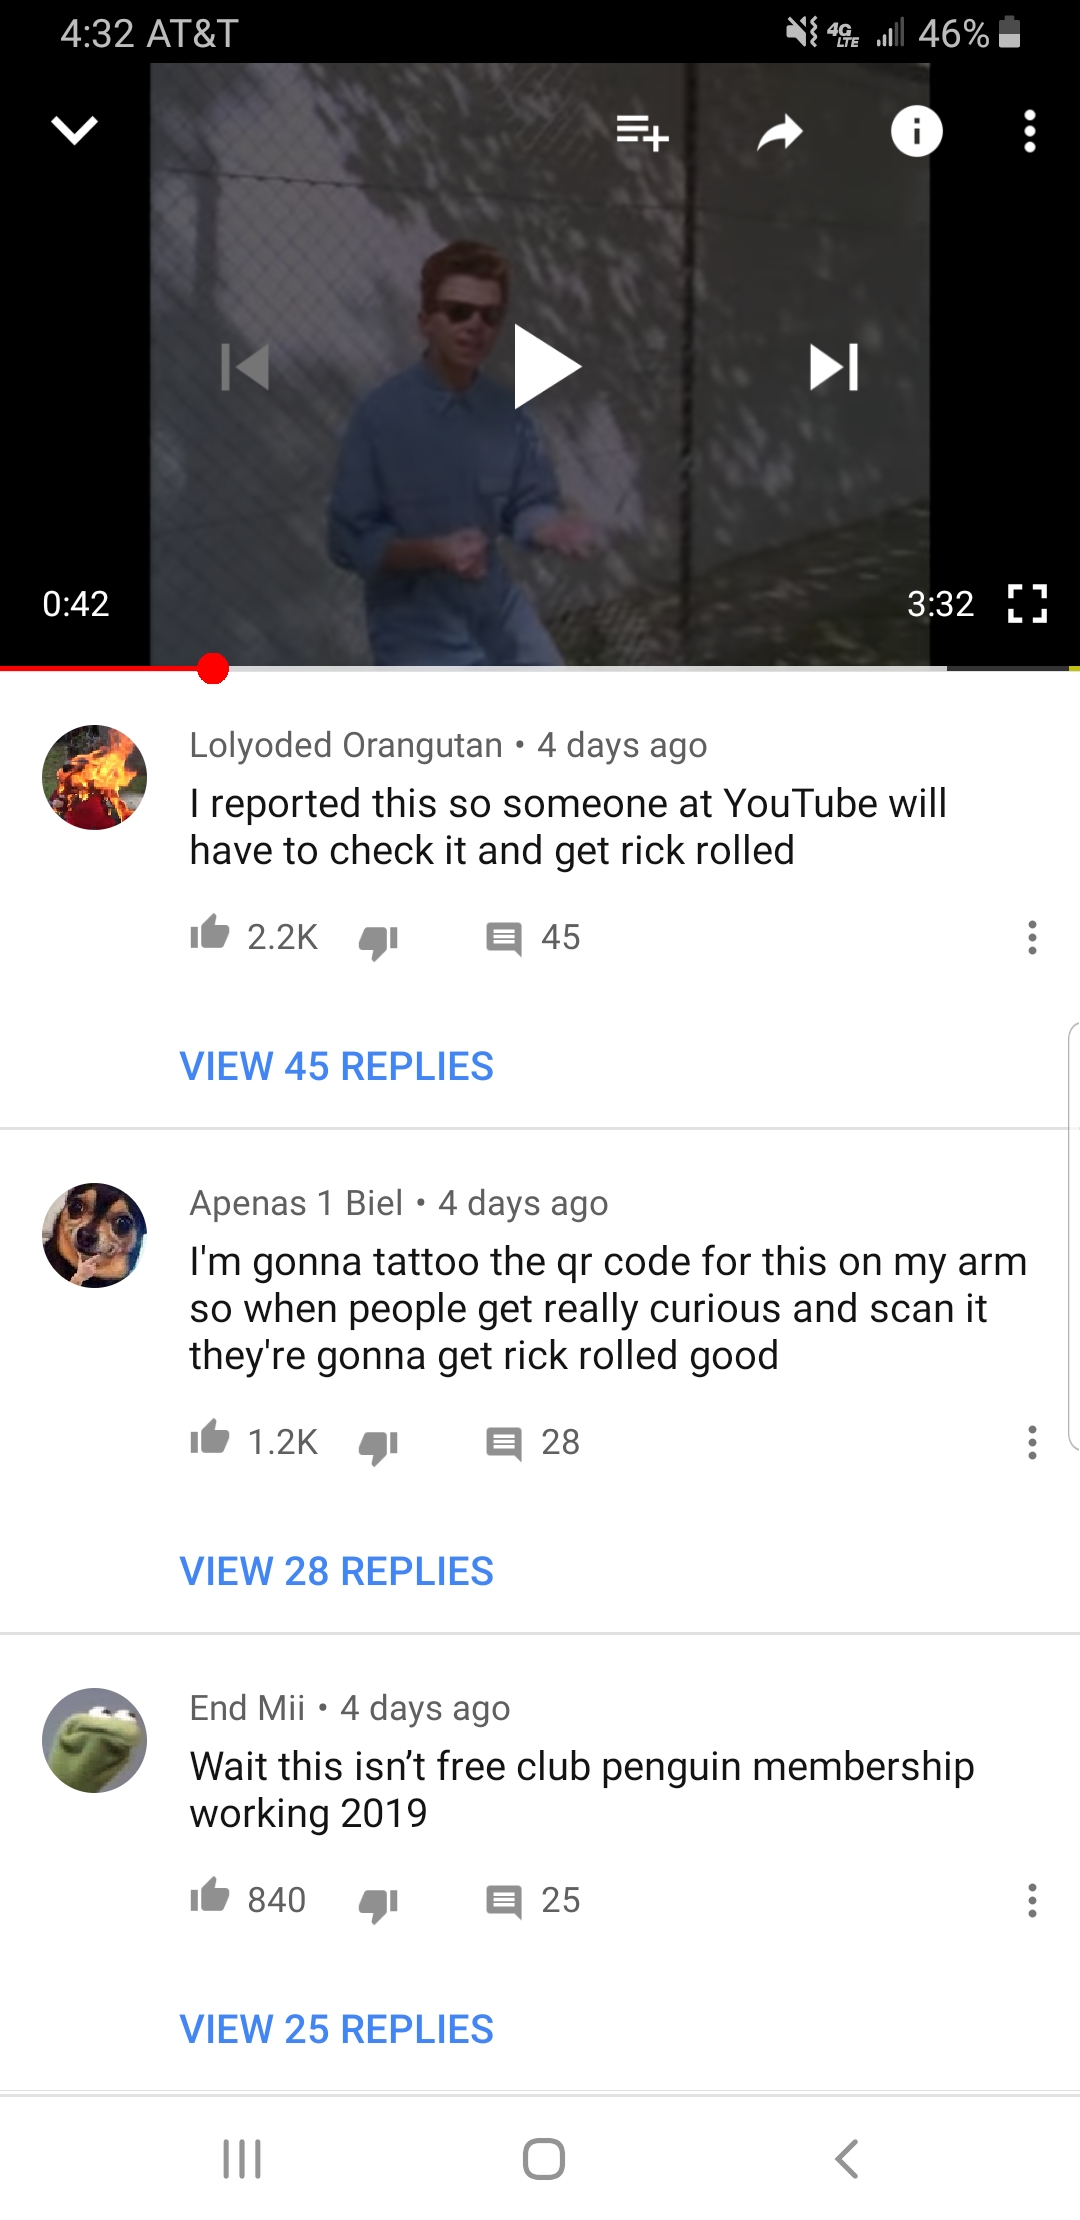 screenshot - At&T 15.4 46% 332 Lolyoded Orangutan 4 days ago I reported this so someone at YouTube will have to check it and get rick rolled 2. 2K 4 5 View 45 Replies Apenas 1 Biel. 4 days ago I'm gonna tattoo the qr code for this on my arm so when people